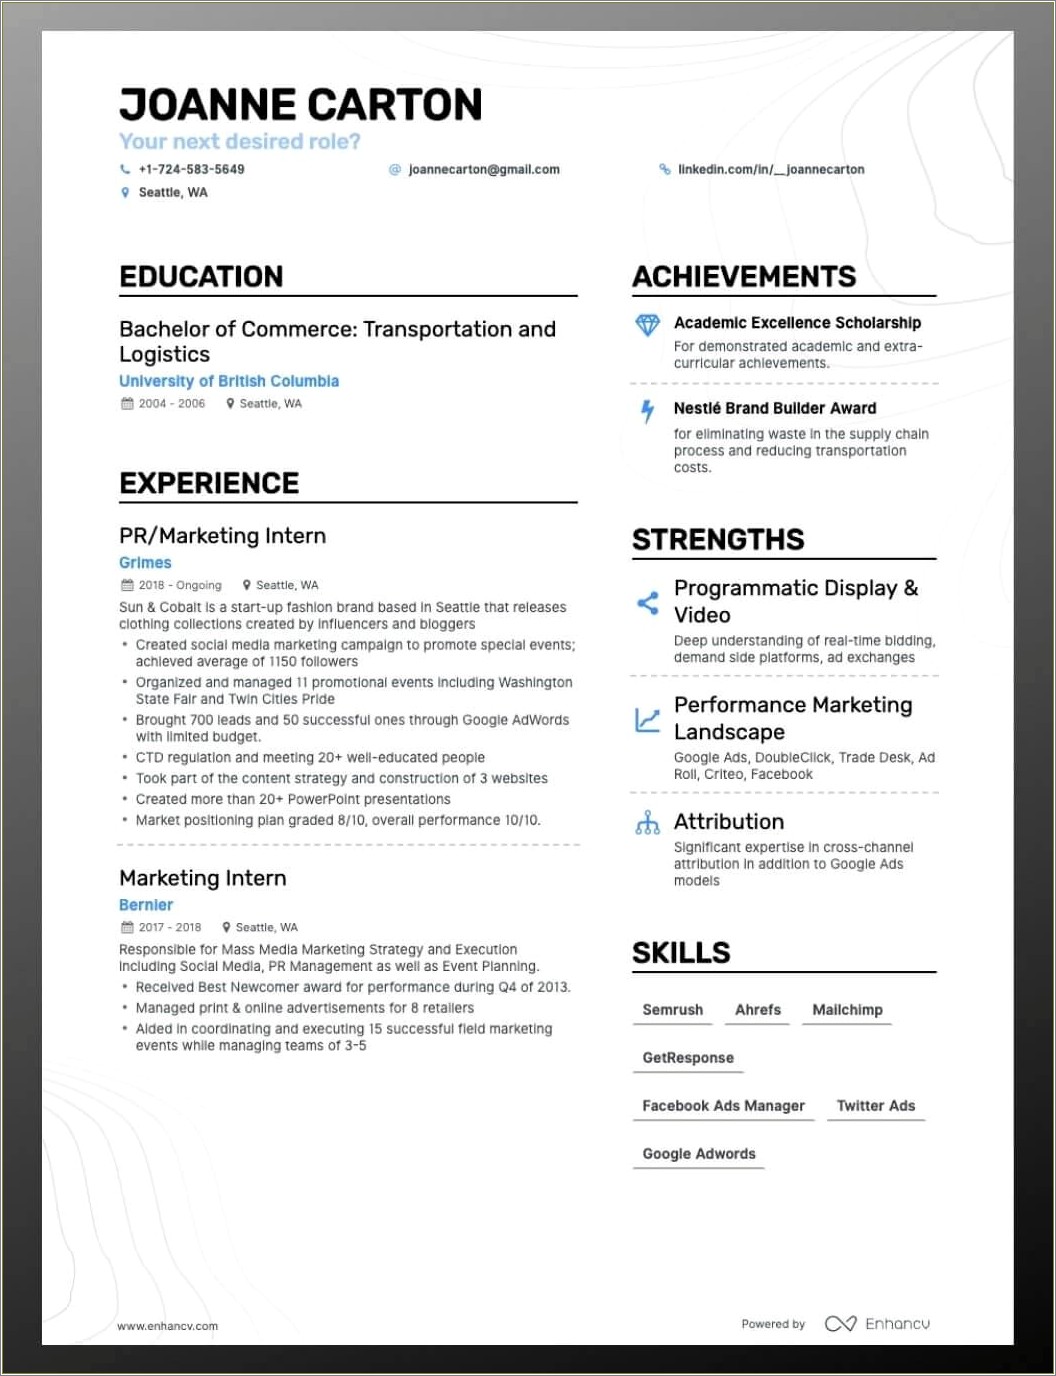 Applying For My First Job Resume